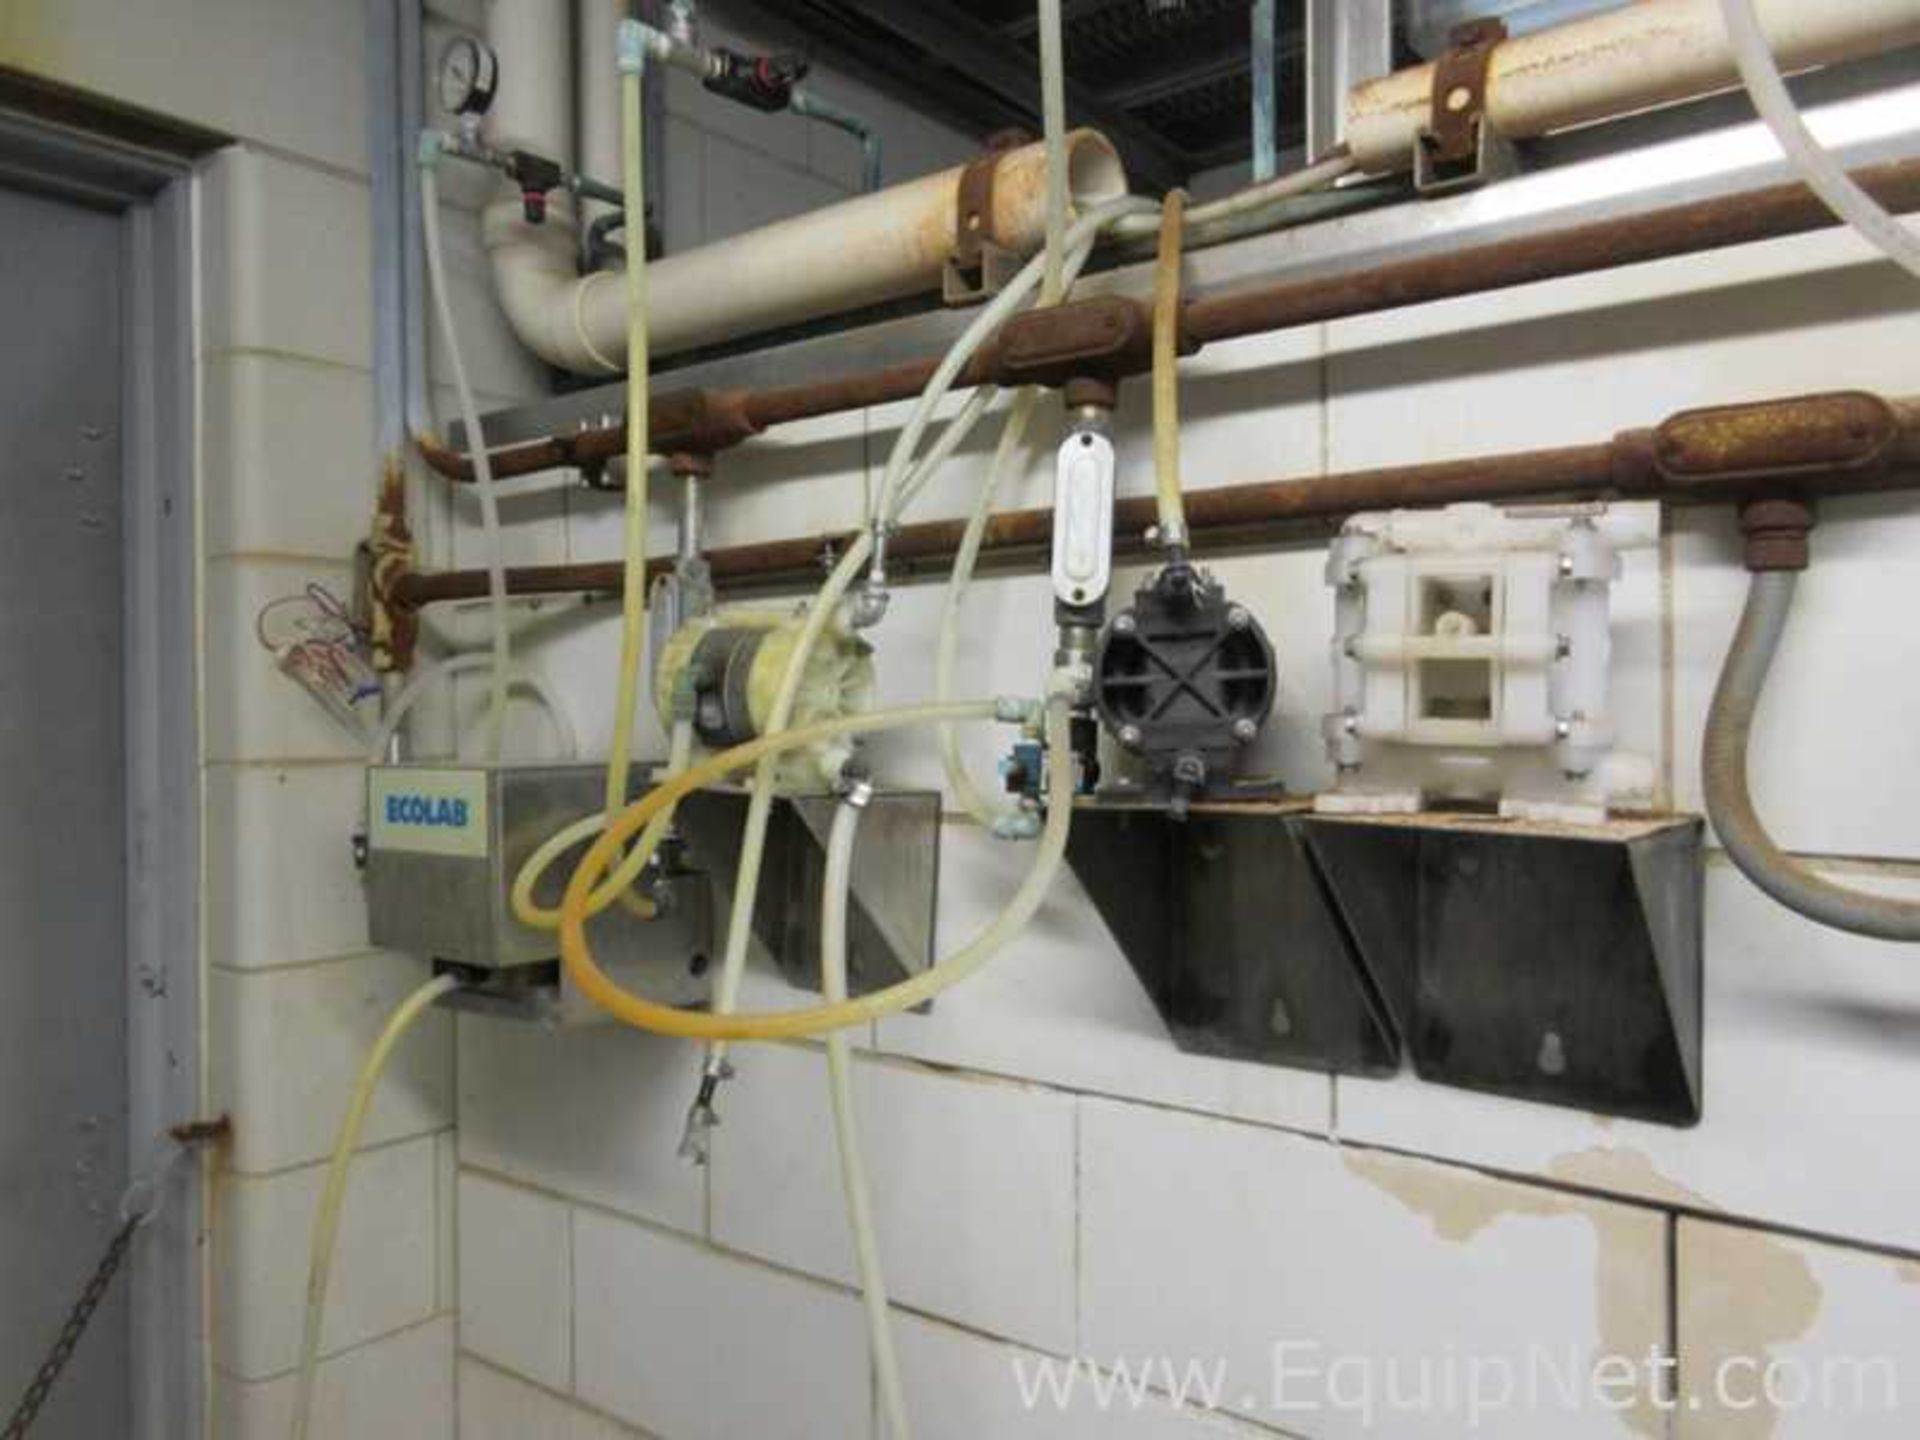 EQUIPNET LISTING #775980; REMOVAL COST: $15,754.00; DESCRIPTION: CIP System With Three Tanks, - Image 17 of 17